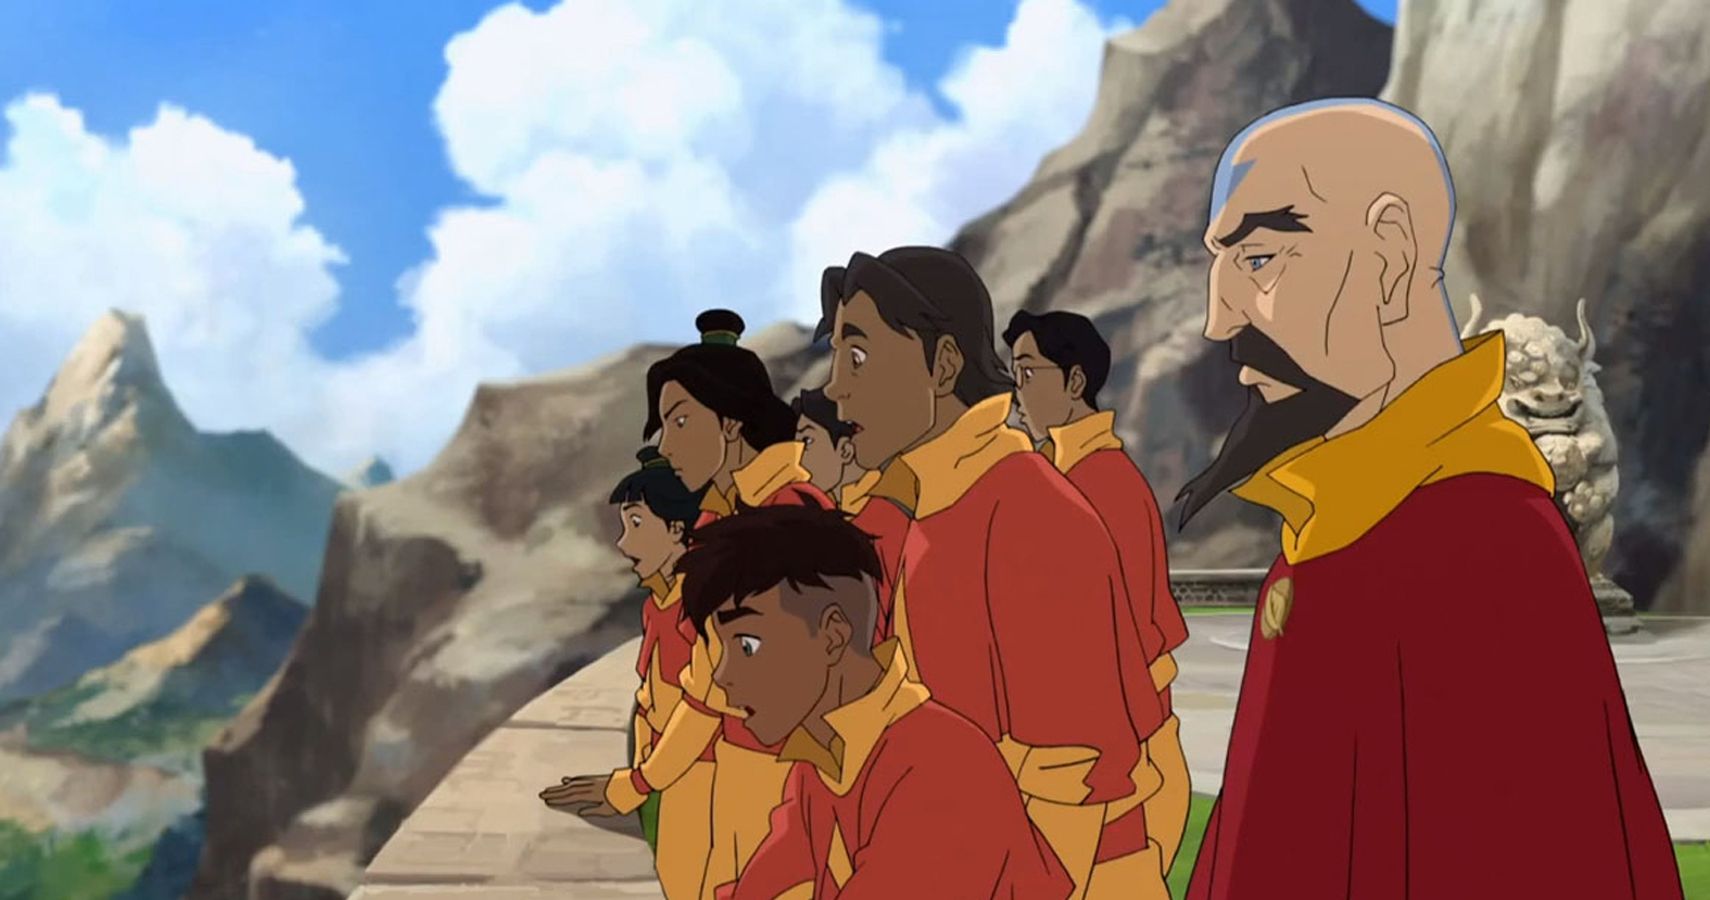 Aang Visits The Northern Air Temple, Full Scene